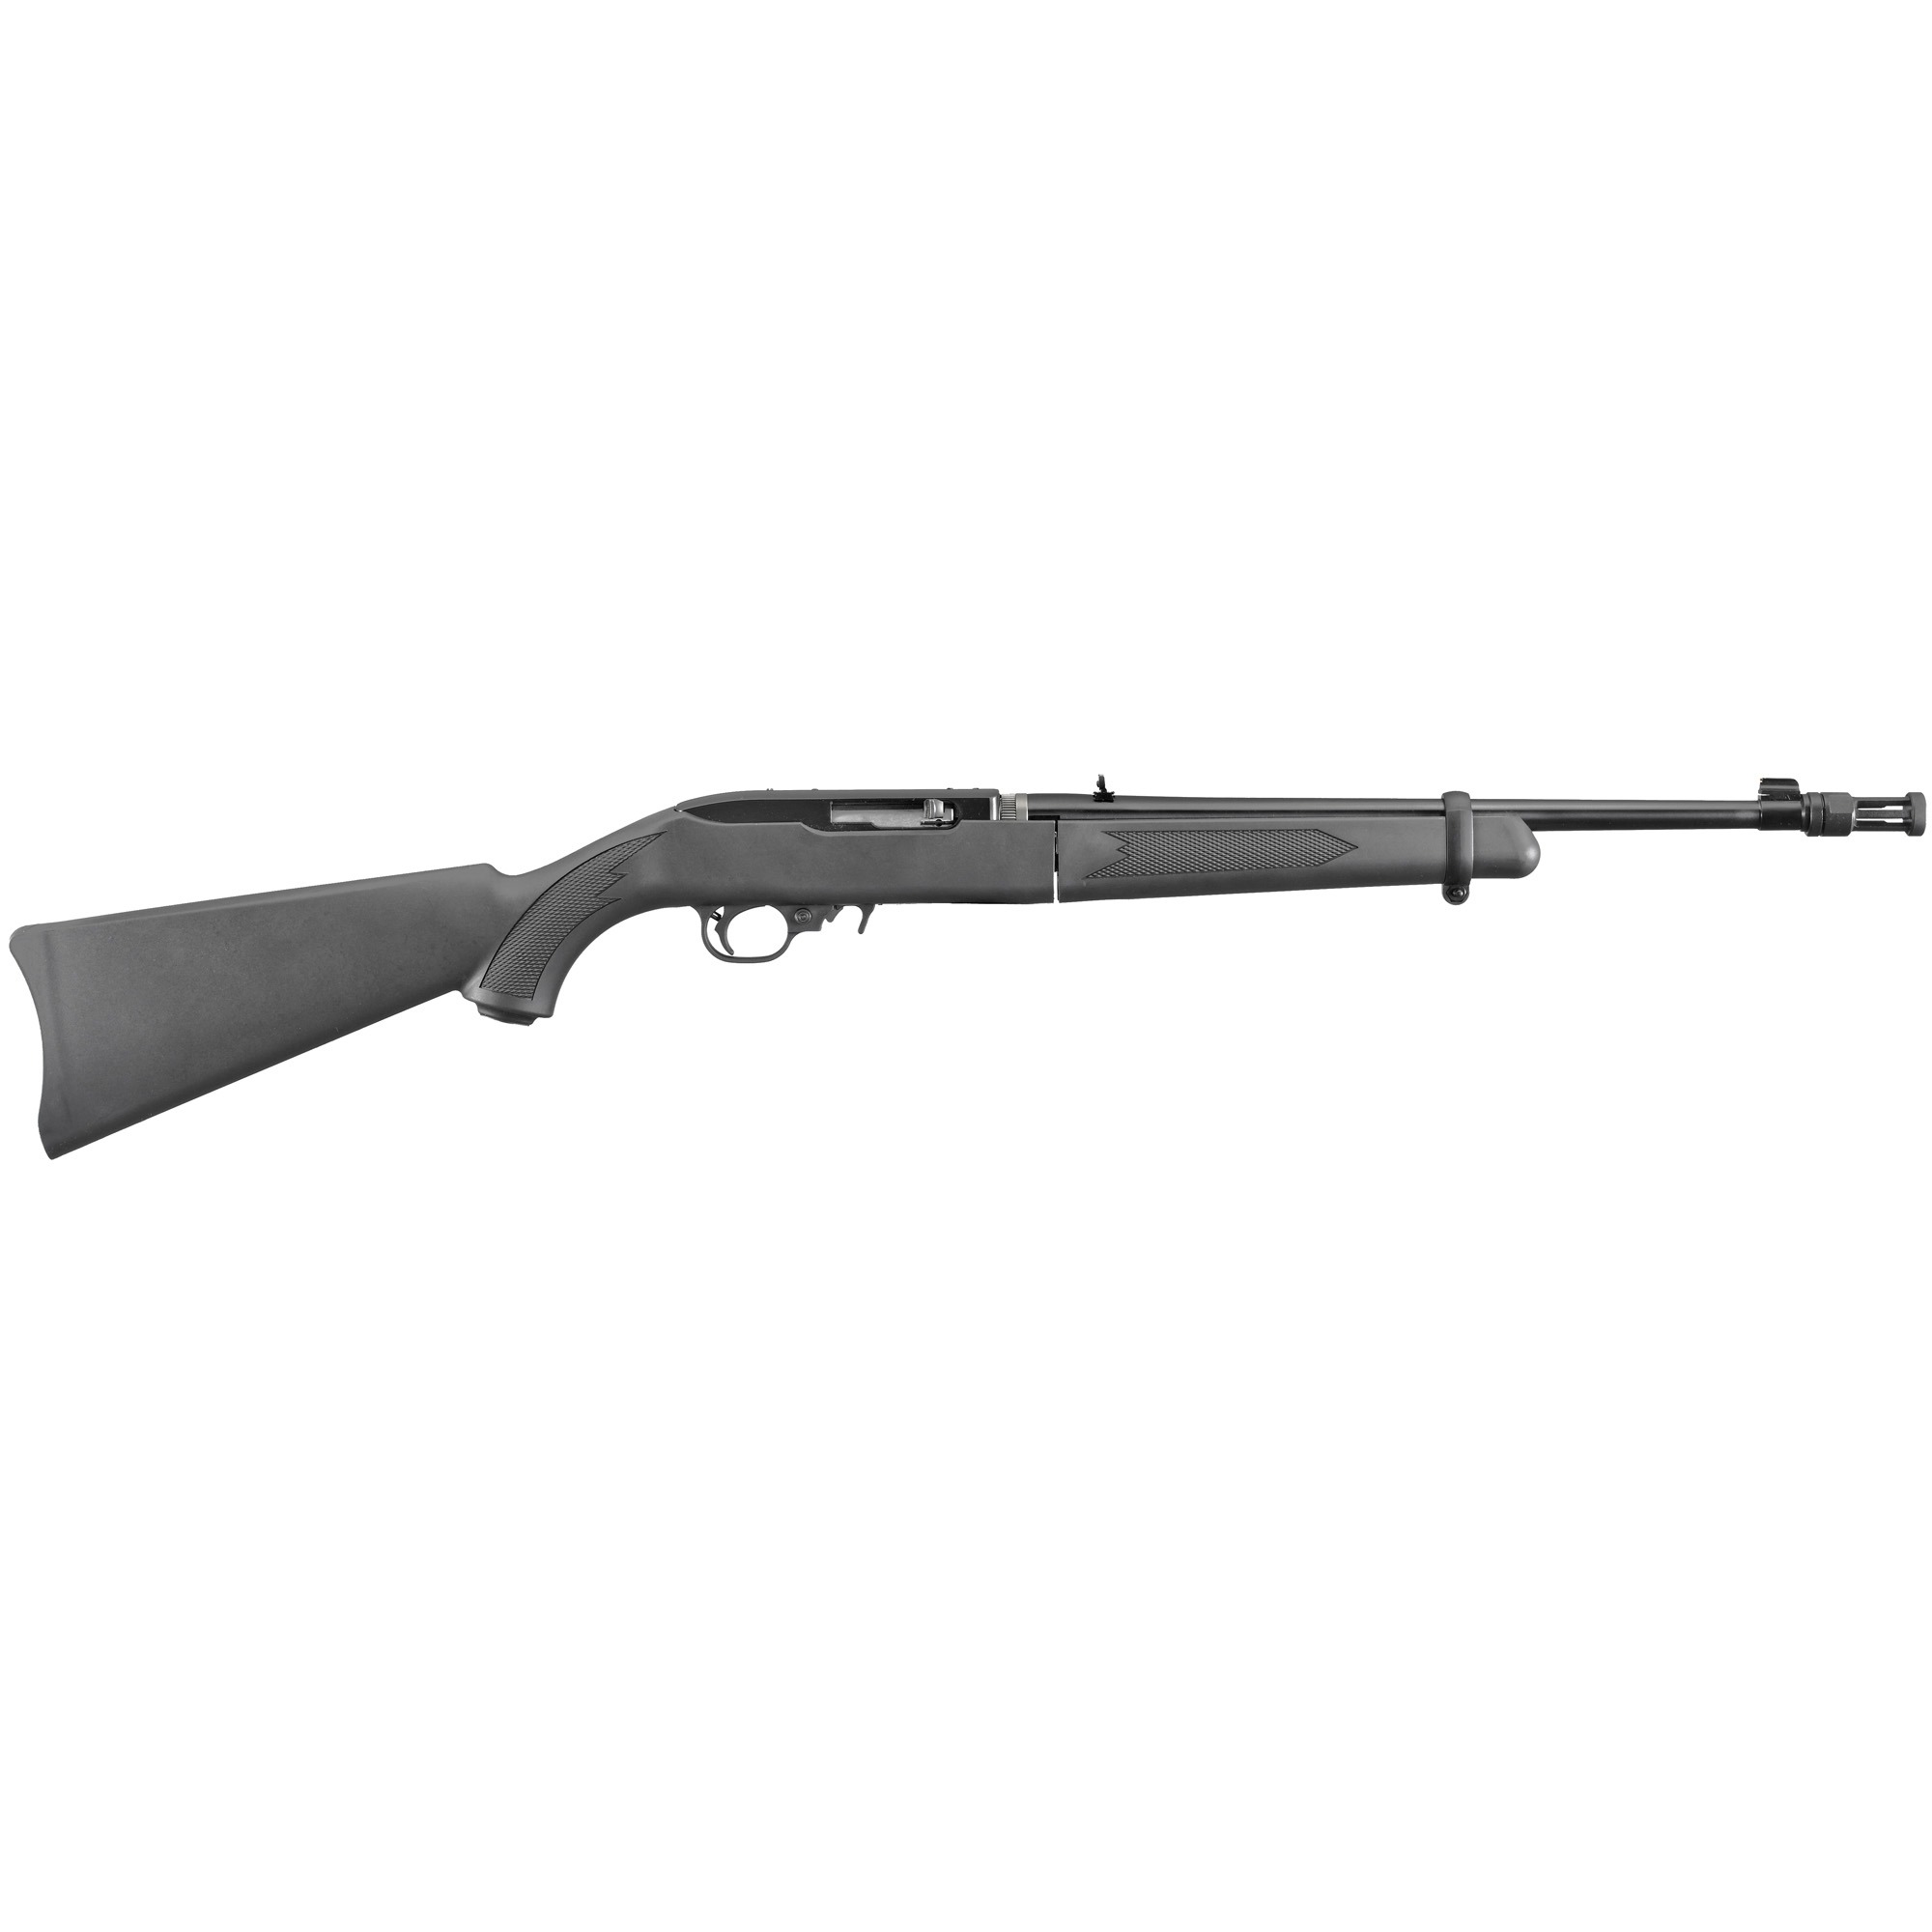 Ruger 11112 10/22 Takedown 22 LR Caliber with 10+1 Capacity, 16.40